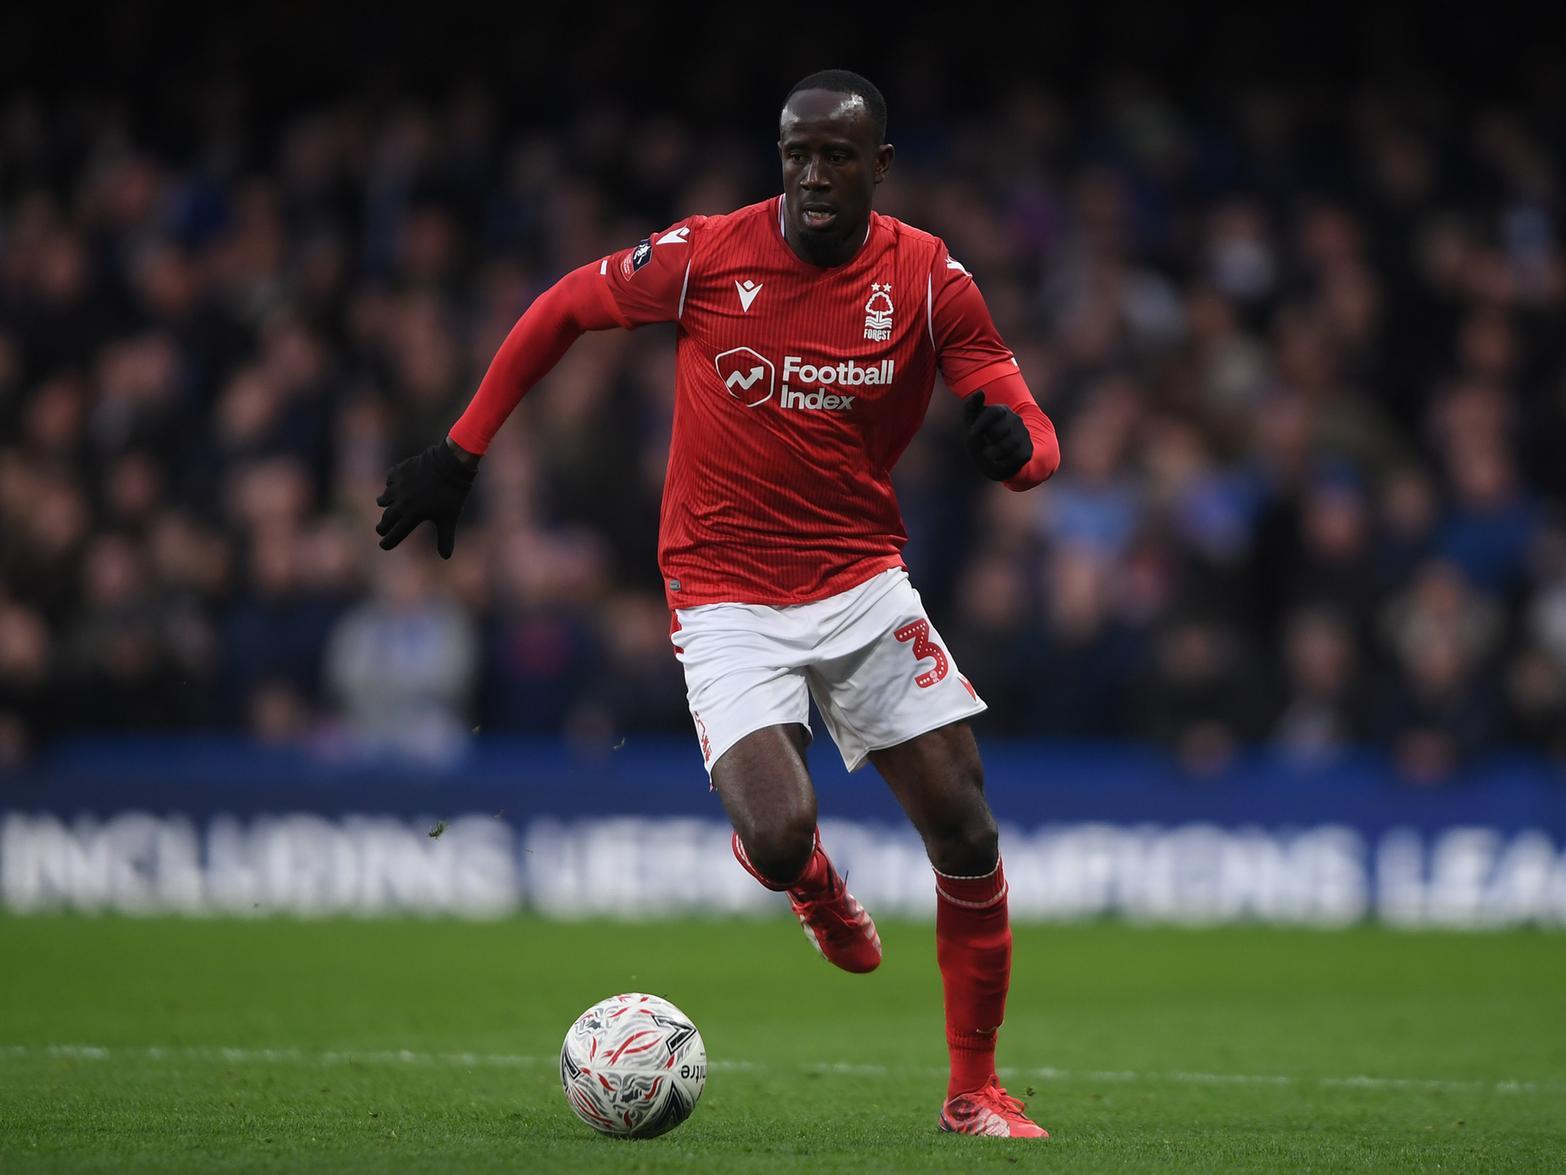 Cardiff City are hopeful of wrapping up a deal for Nottingham Forest winger Albert Adomah, who has previously played for the likes of Aston Villa and Middlesbrough. (Wales Online)